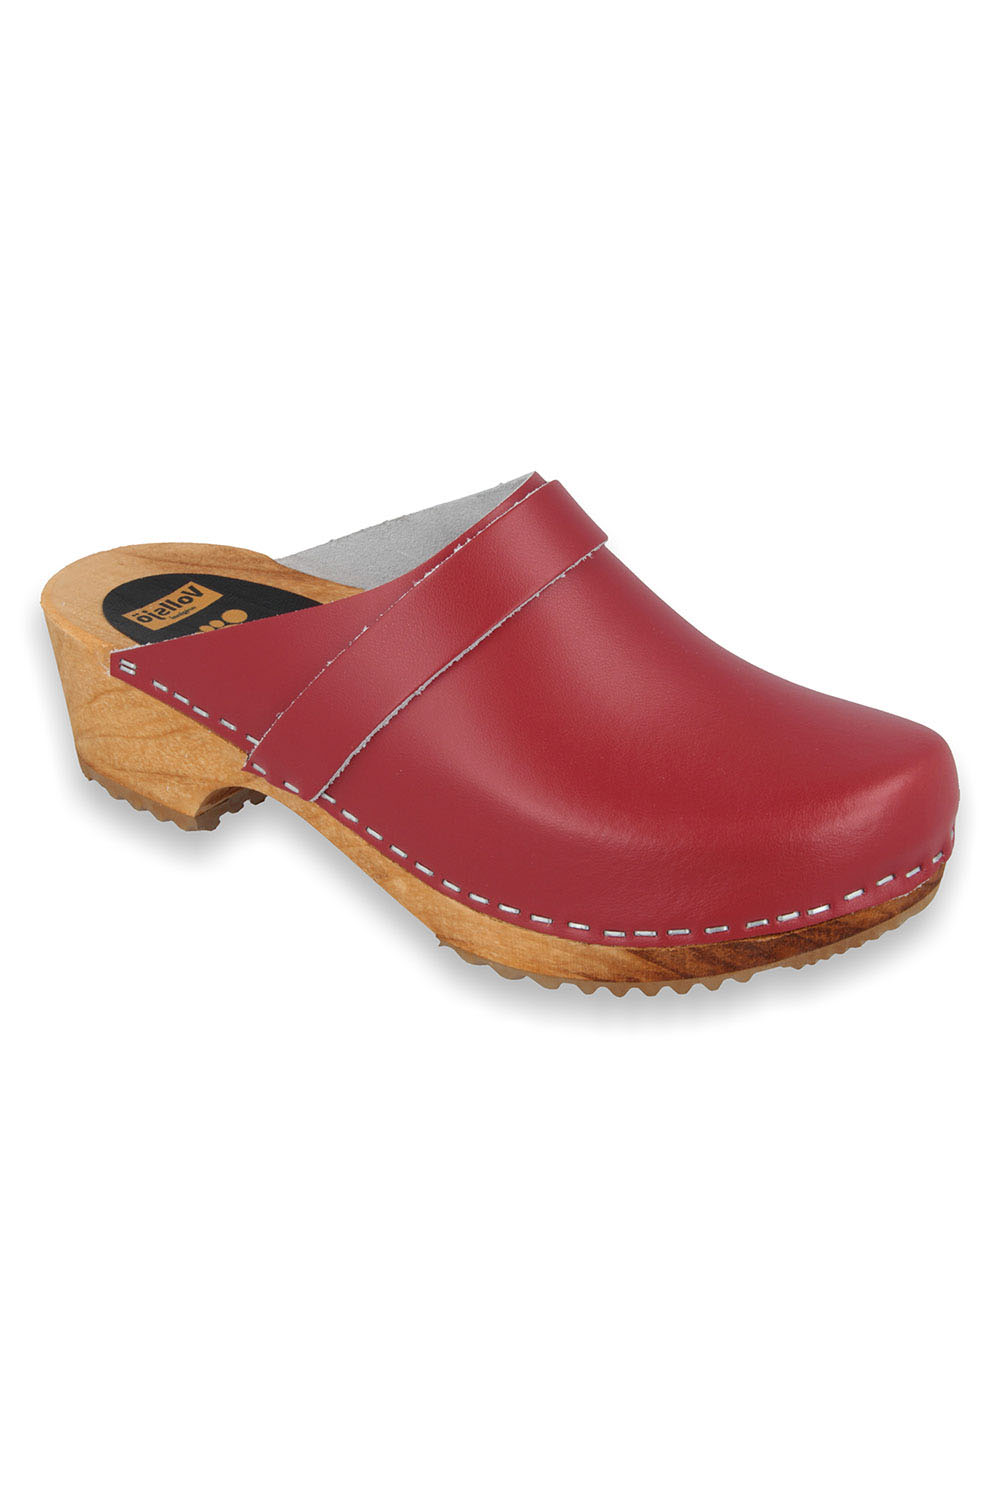 casual clogs